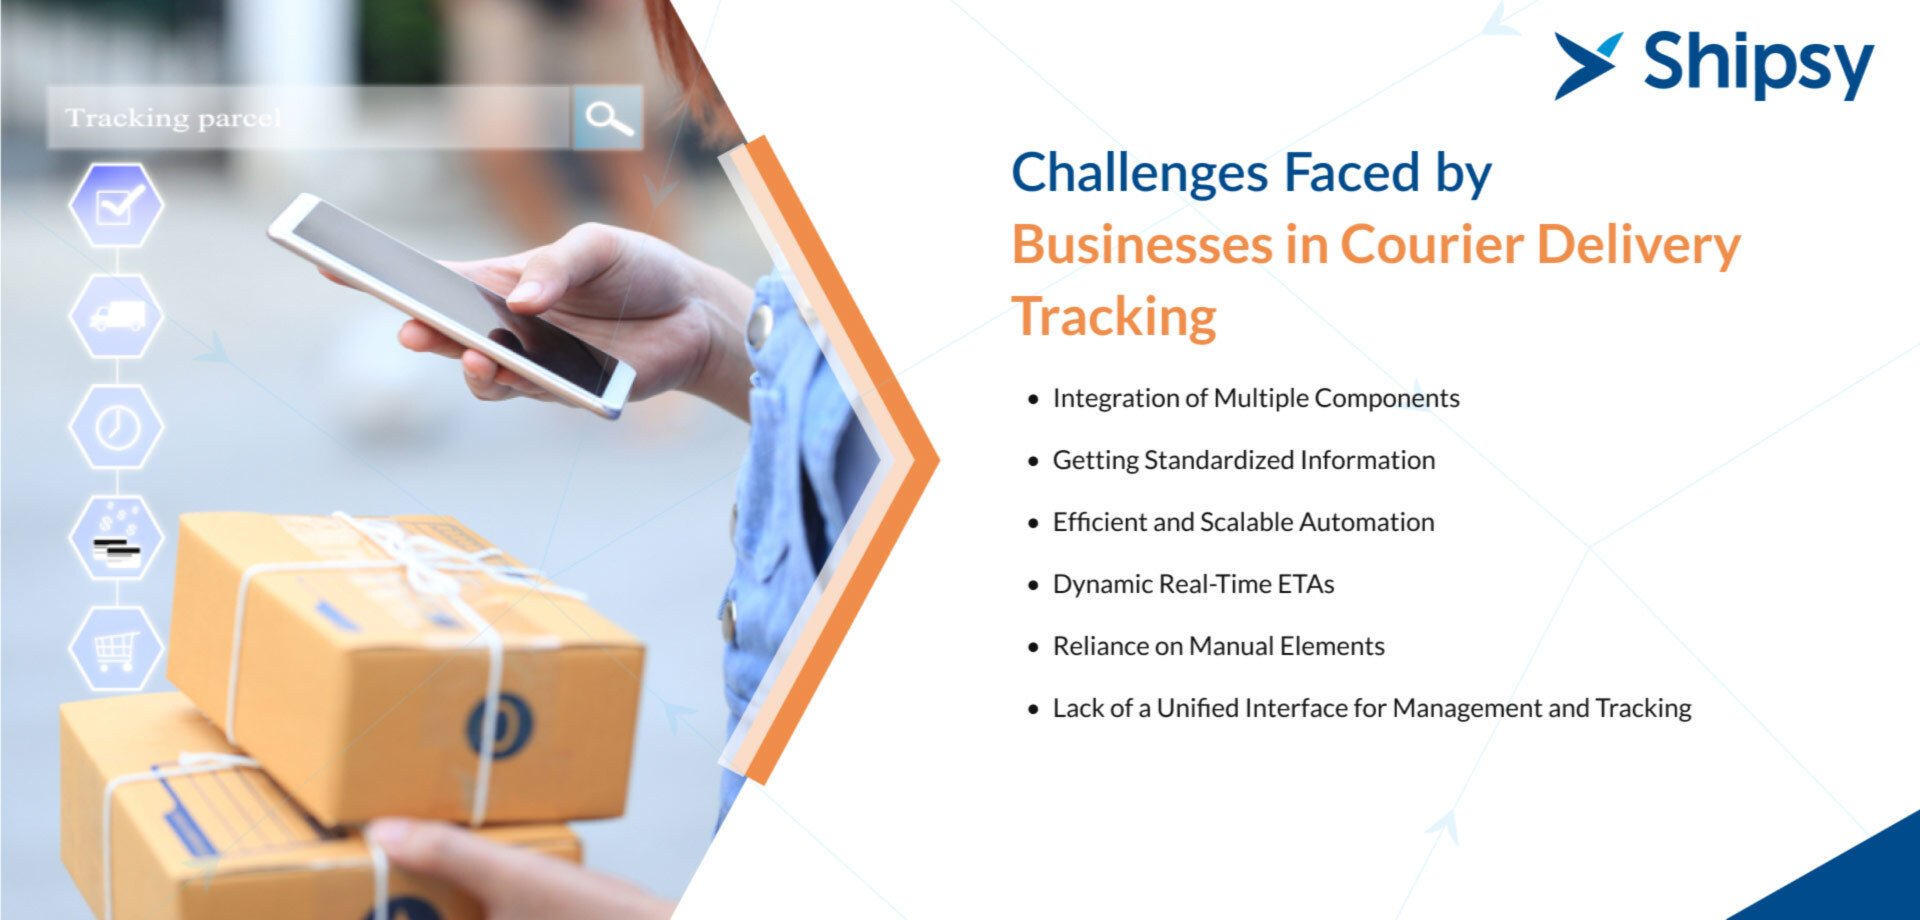 Courier Delivery Tracking Software - Reduce Costs with Real-Time Visibility